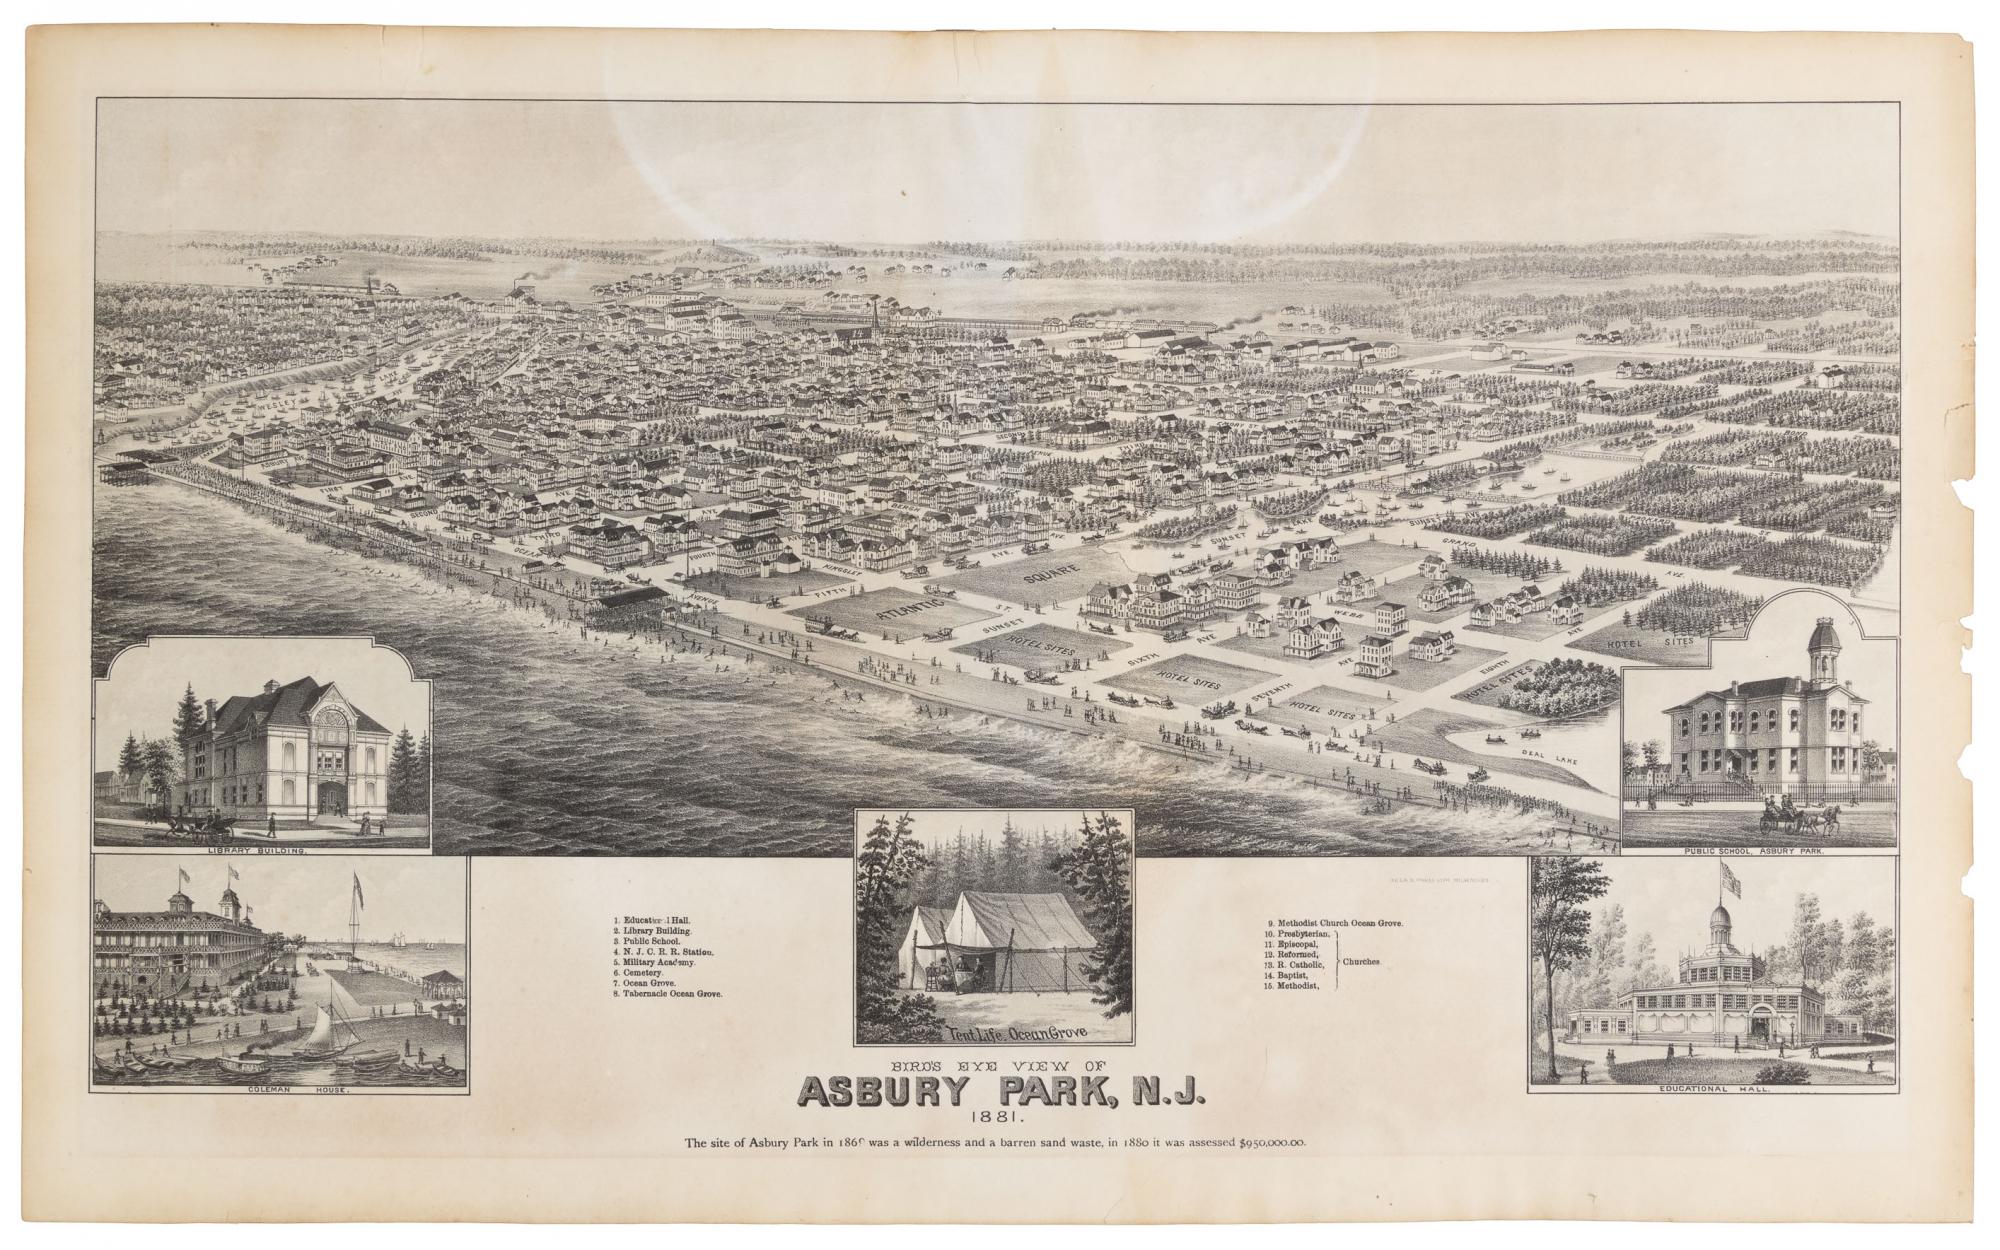 Lithographed 1881 birds-eye view of Asbury Park, New Jersey, the birthplace of Bruce Springsteen, est. $2,000-$3,000